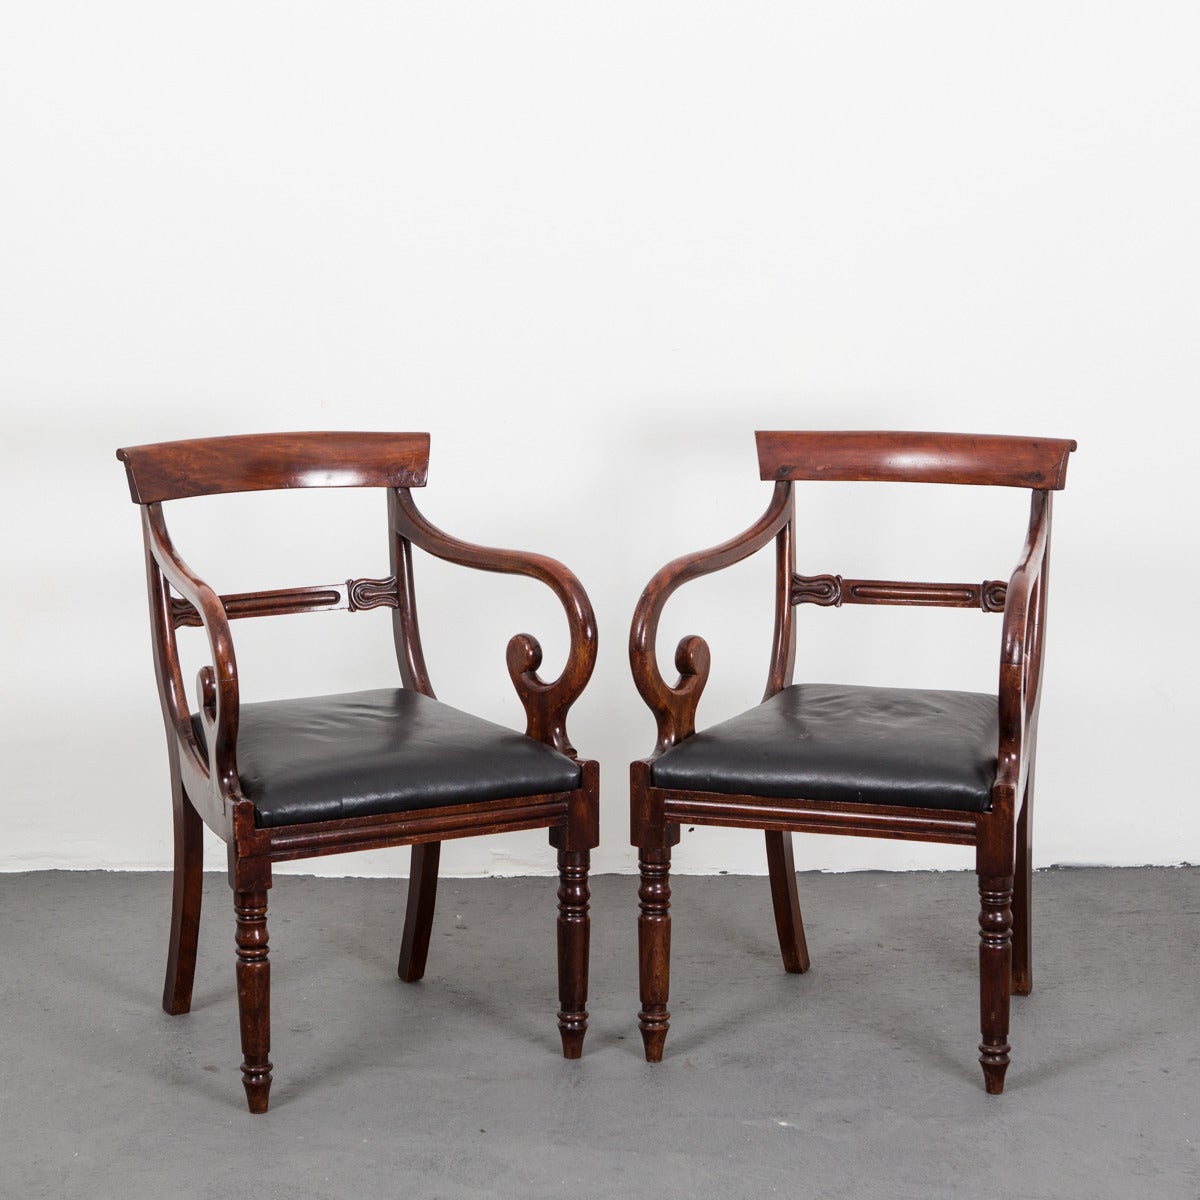 English armchairs made during the Regency period, early 19th century. Frame mahogany and upholstered in a soft black leather.